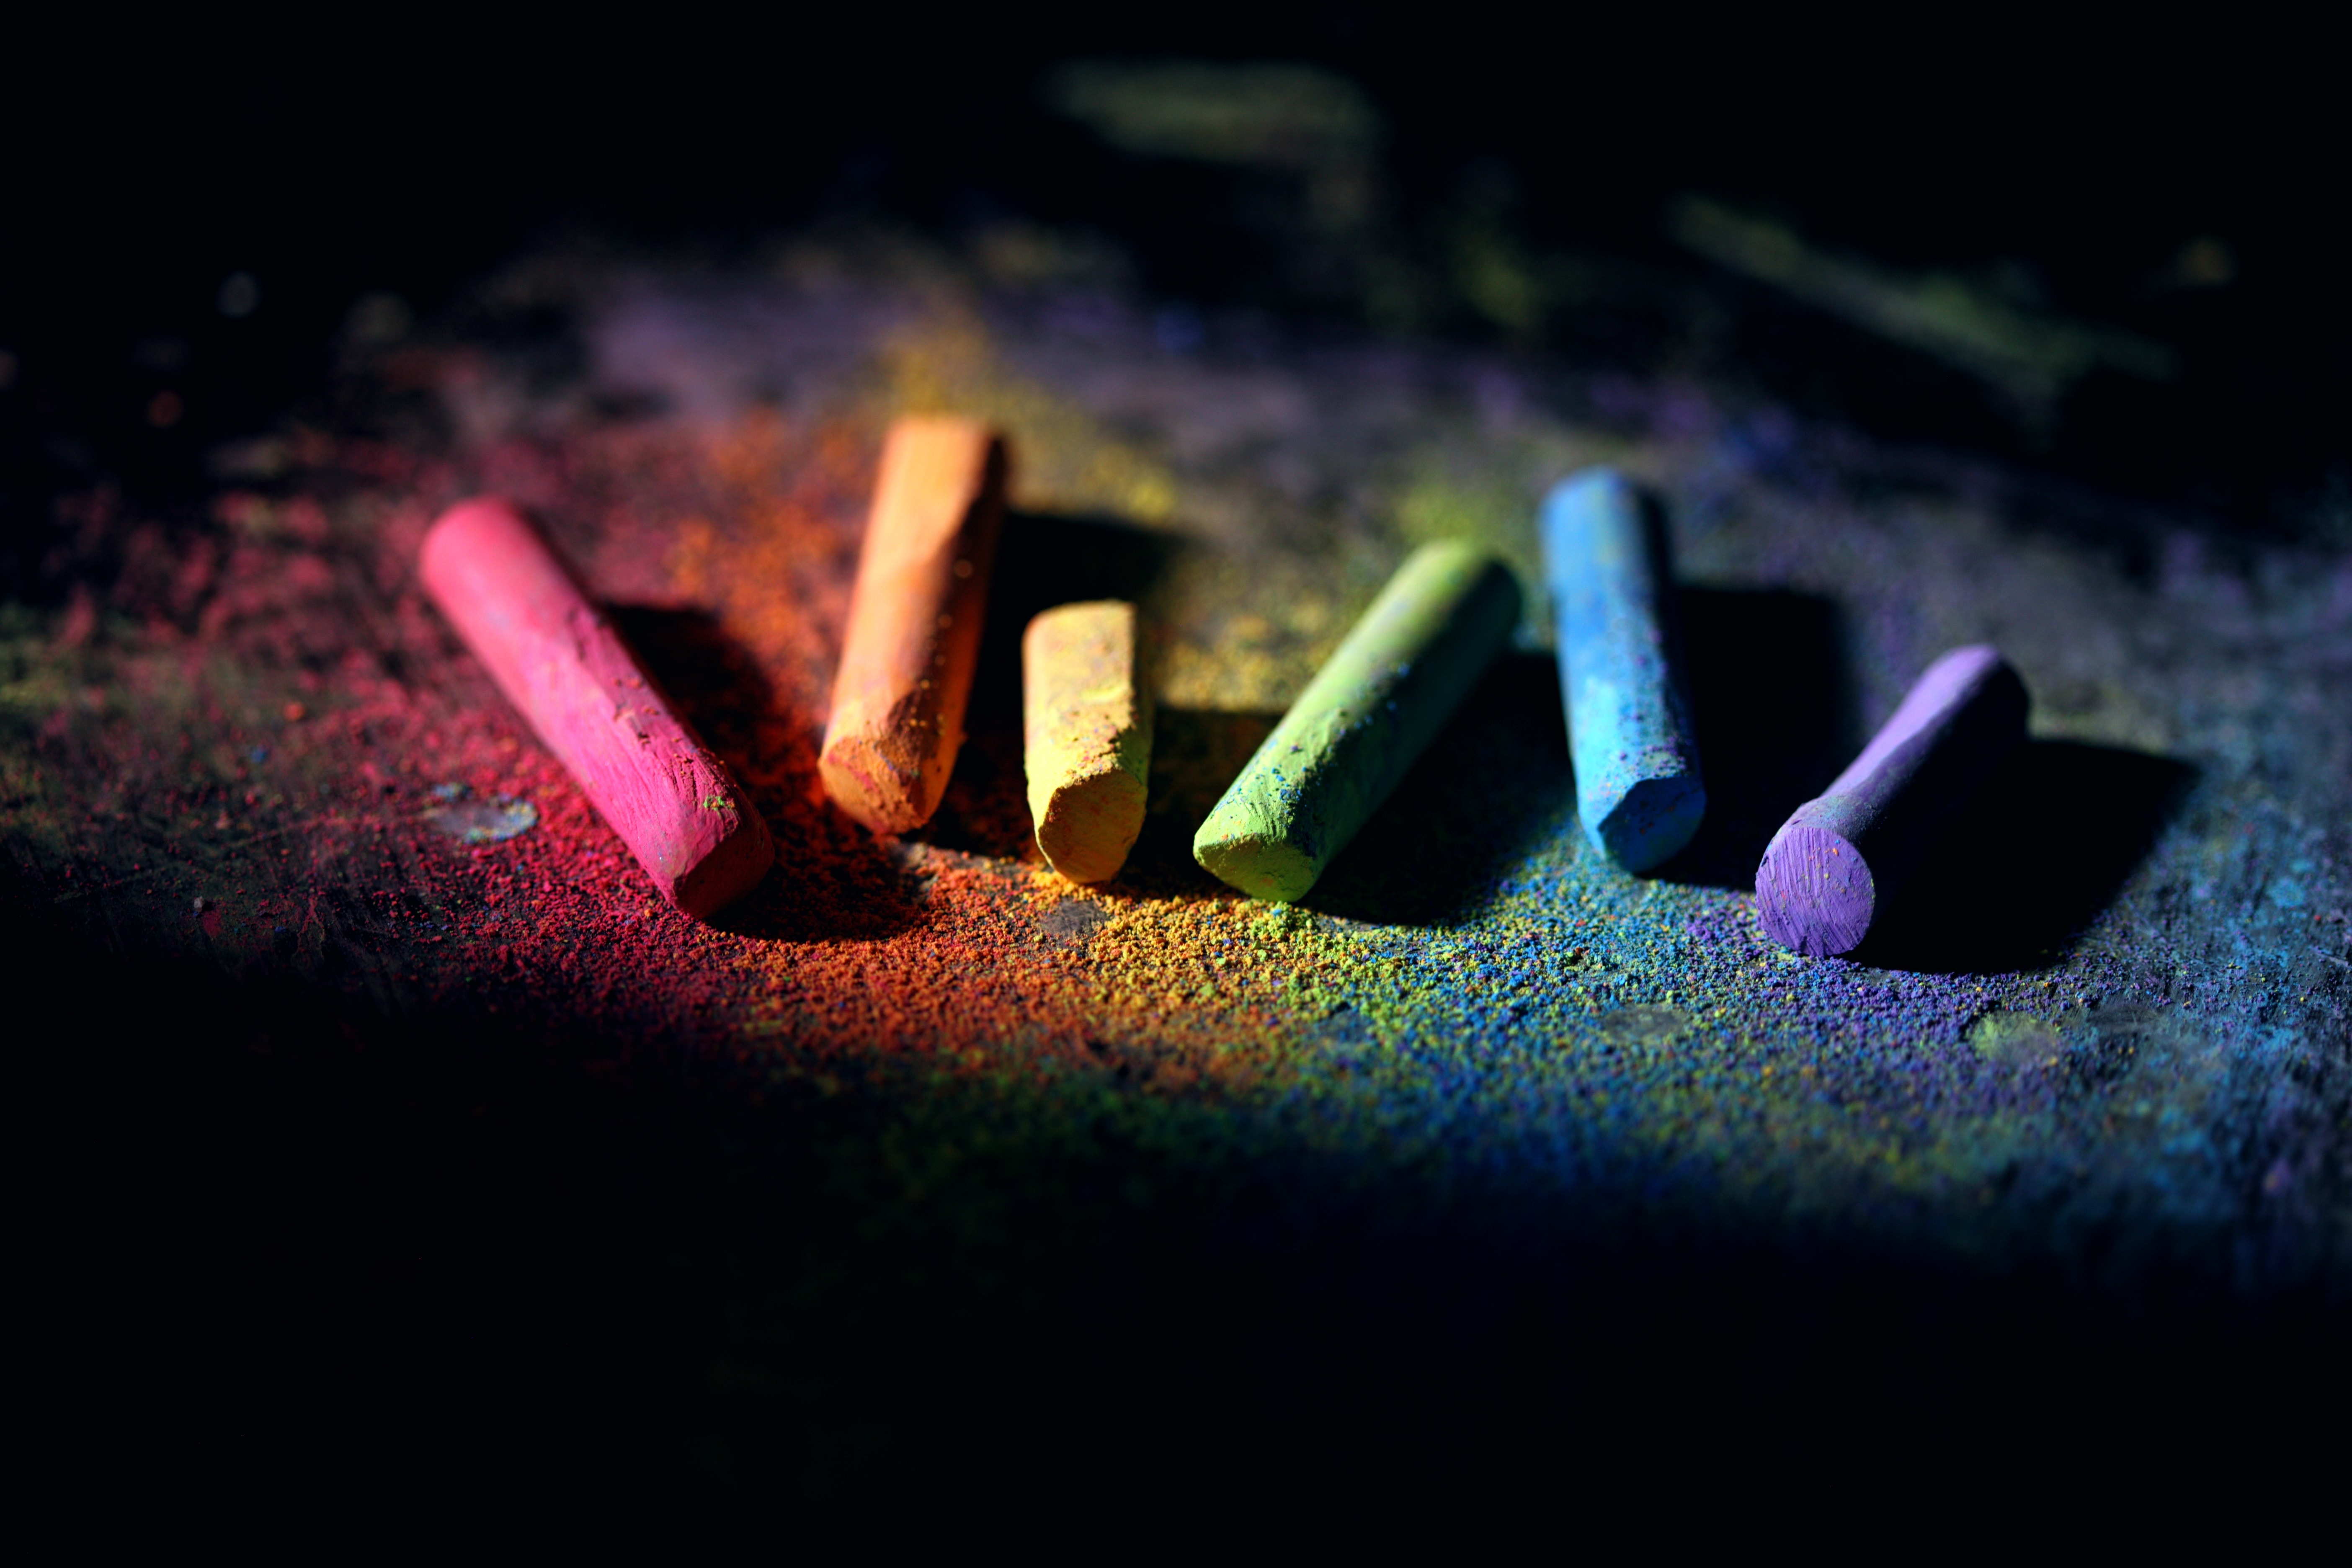 motley, multicolored, miscellanea, miscellaneous, paint, hobby, crayons Free Stock Photo